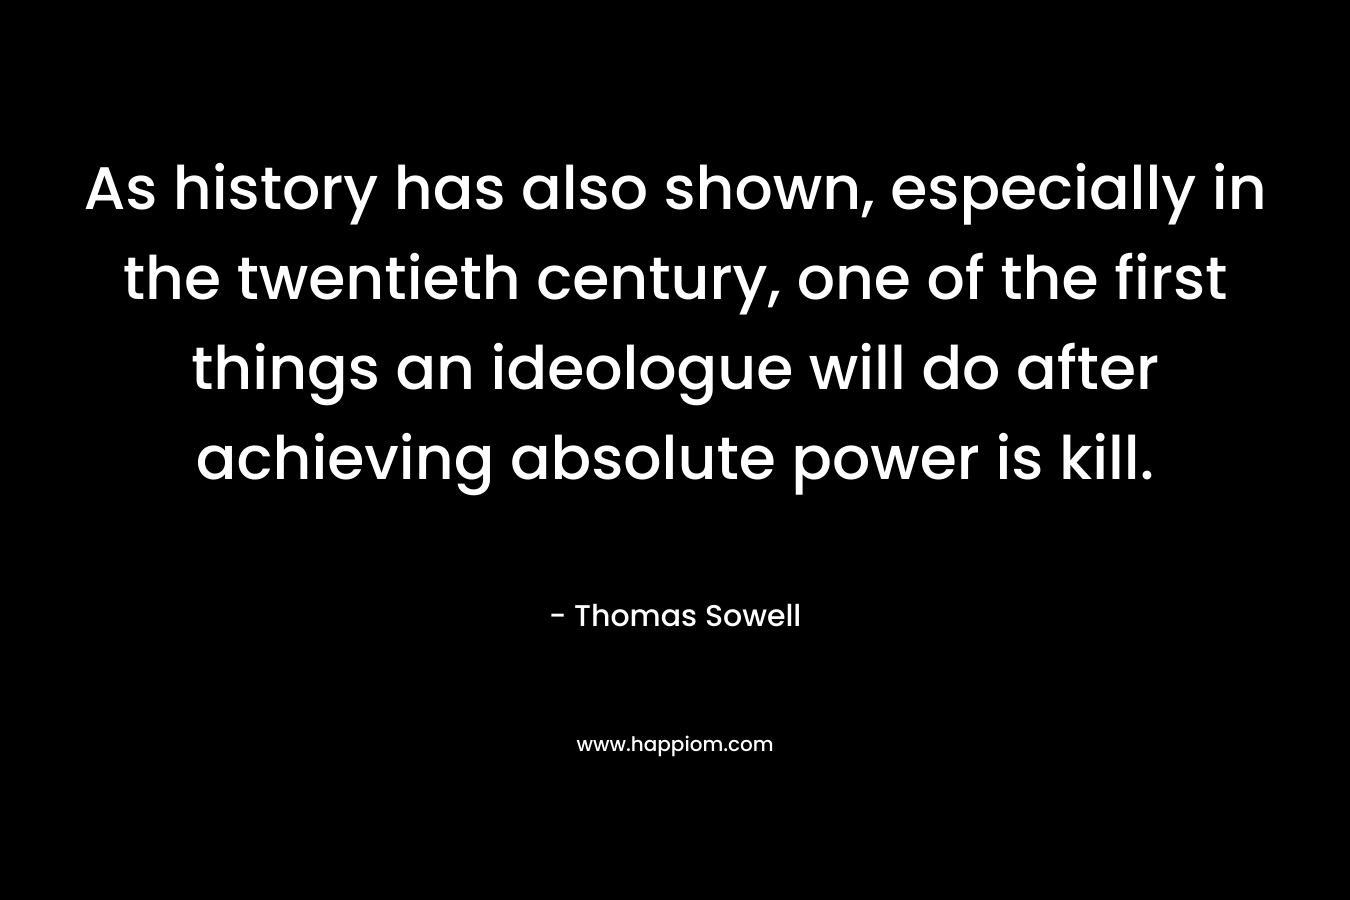 As history has also shown, especially in the twentieth century, one of the first things an ideologue will do after achieving absolute power is kill. – Thomas Sowell